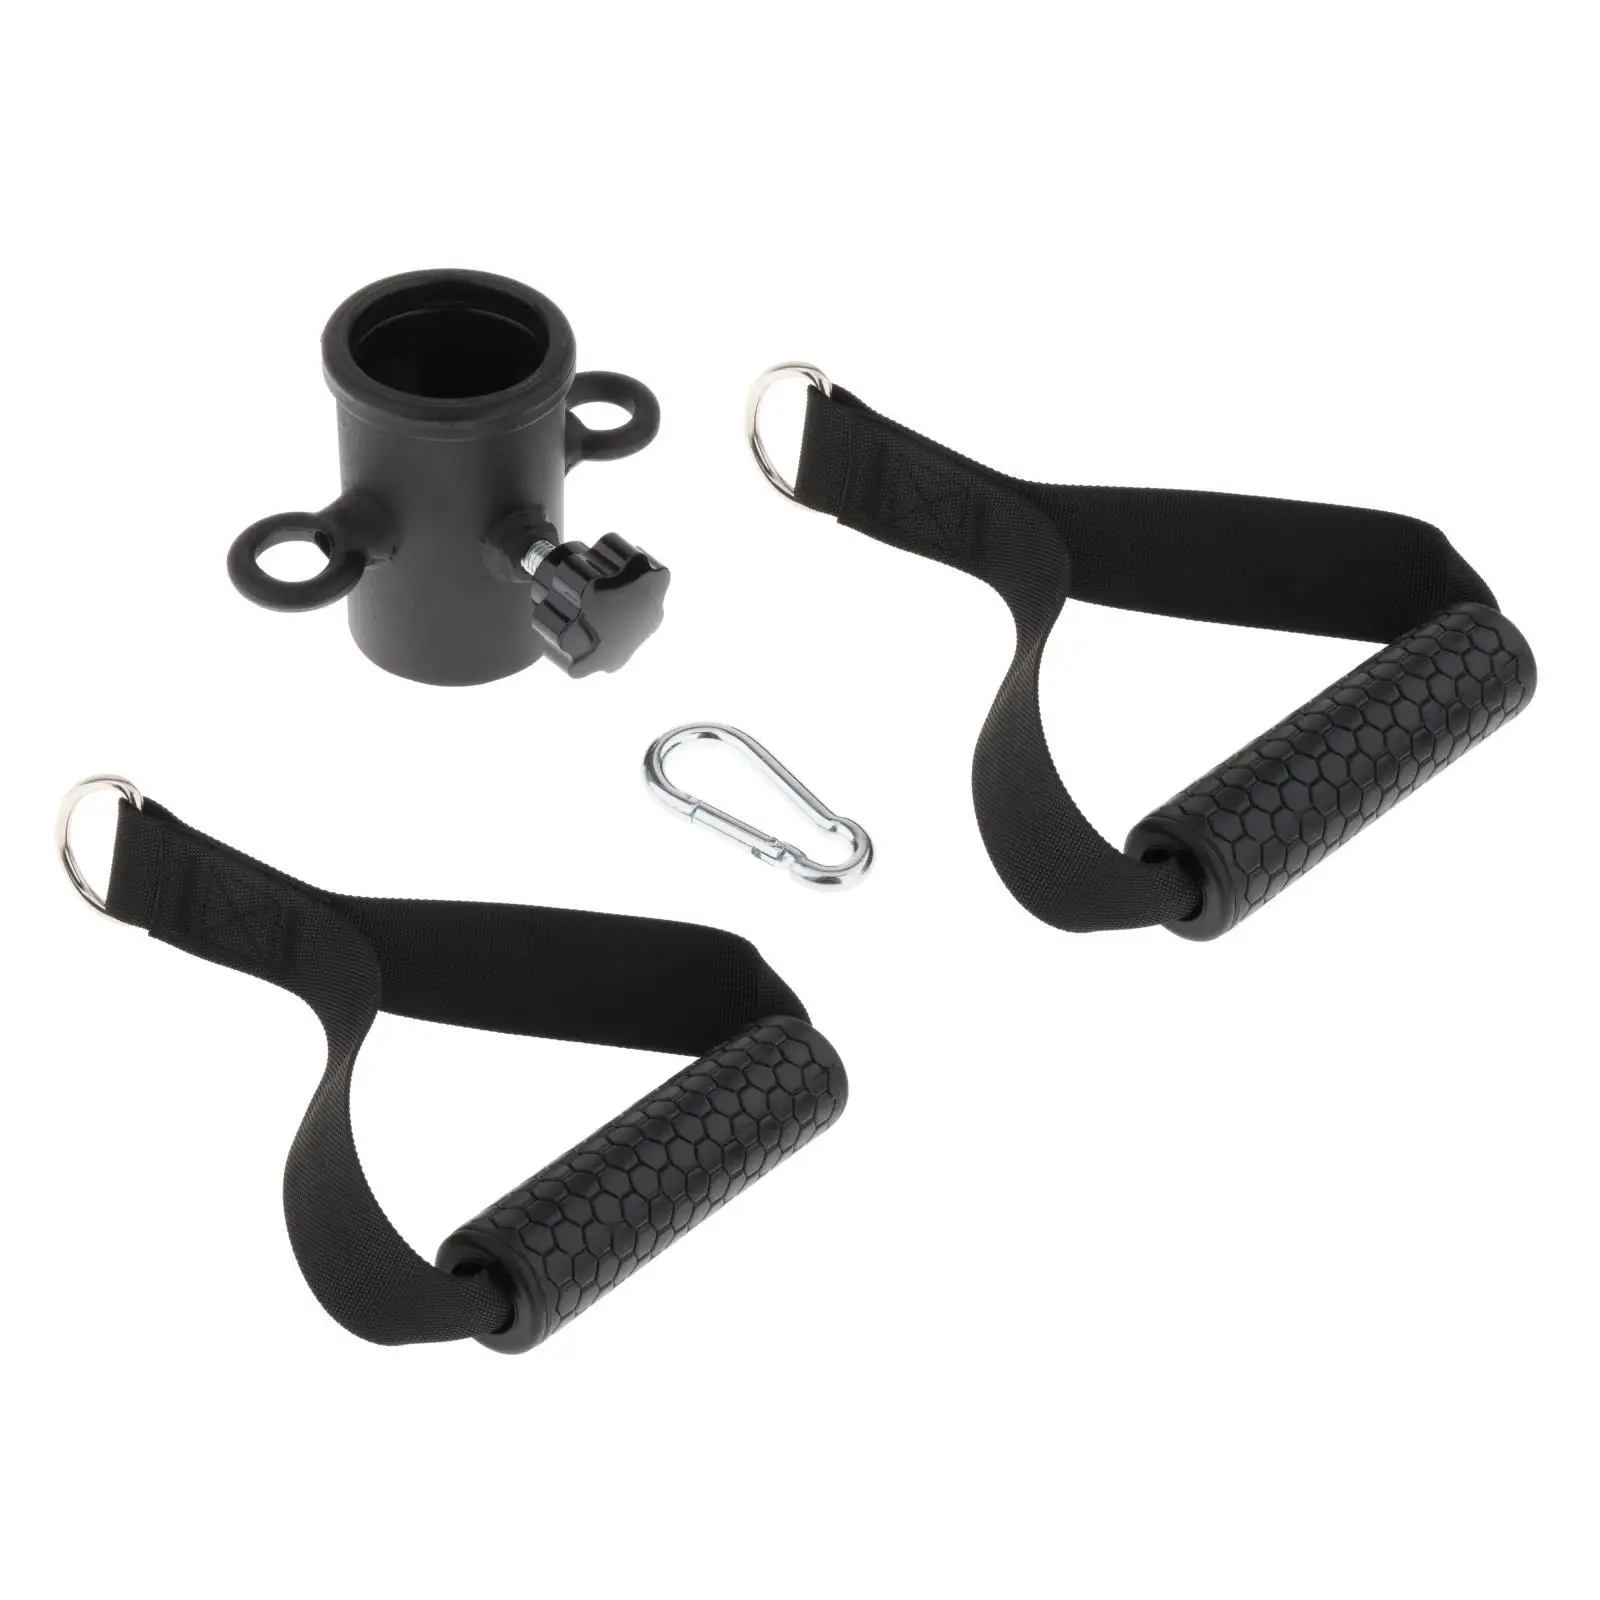 Landmine Double Handle Straps Handle Landmine Attachment Grips for Workout Exercise Home Gym Back Core Strength Training Presses